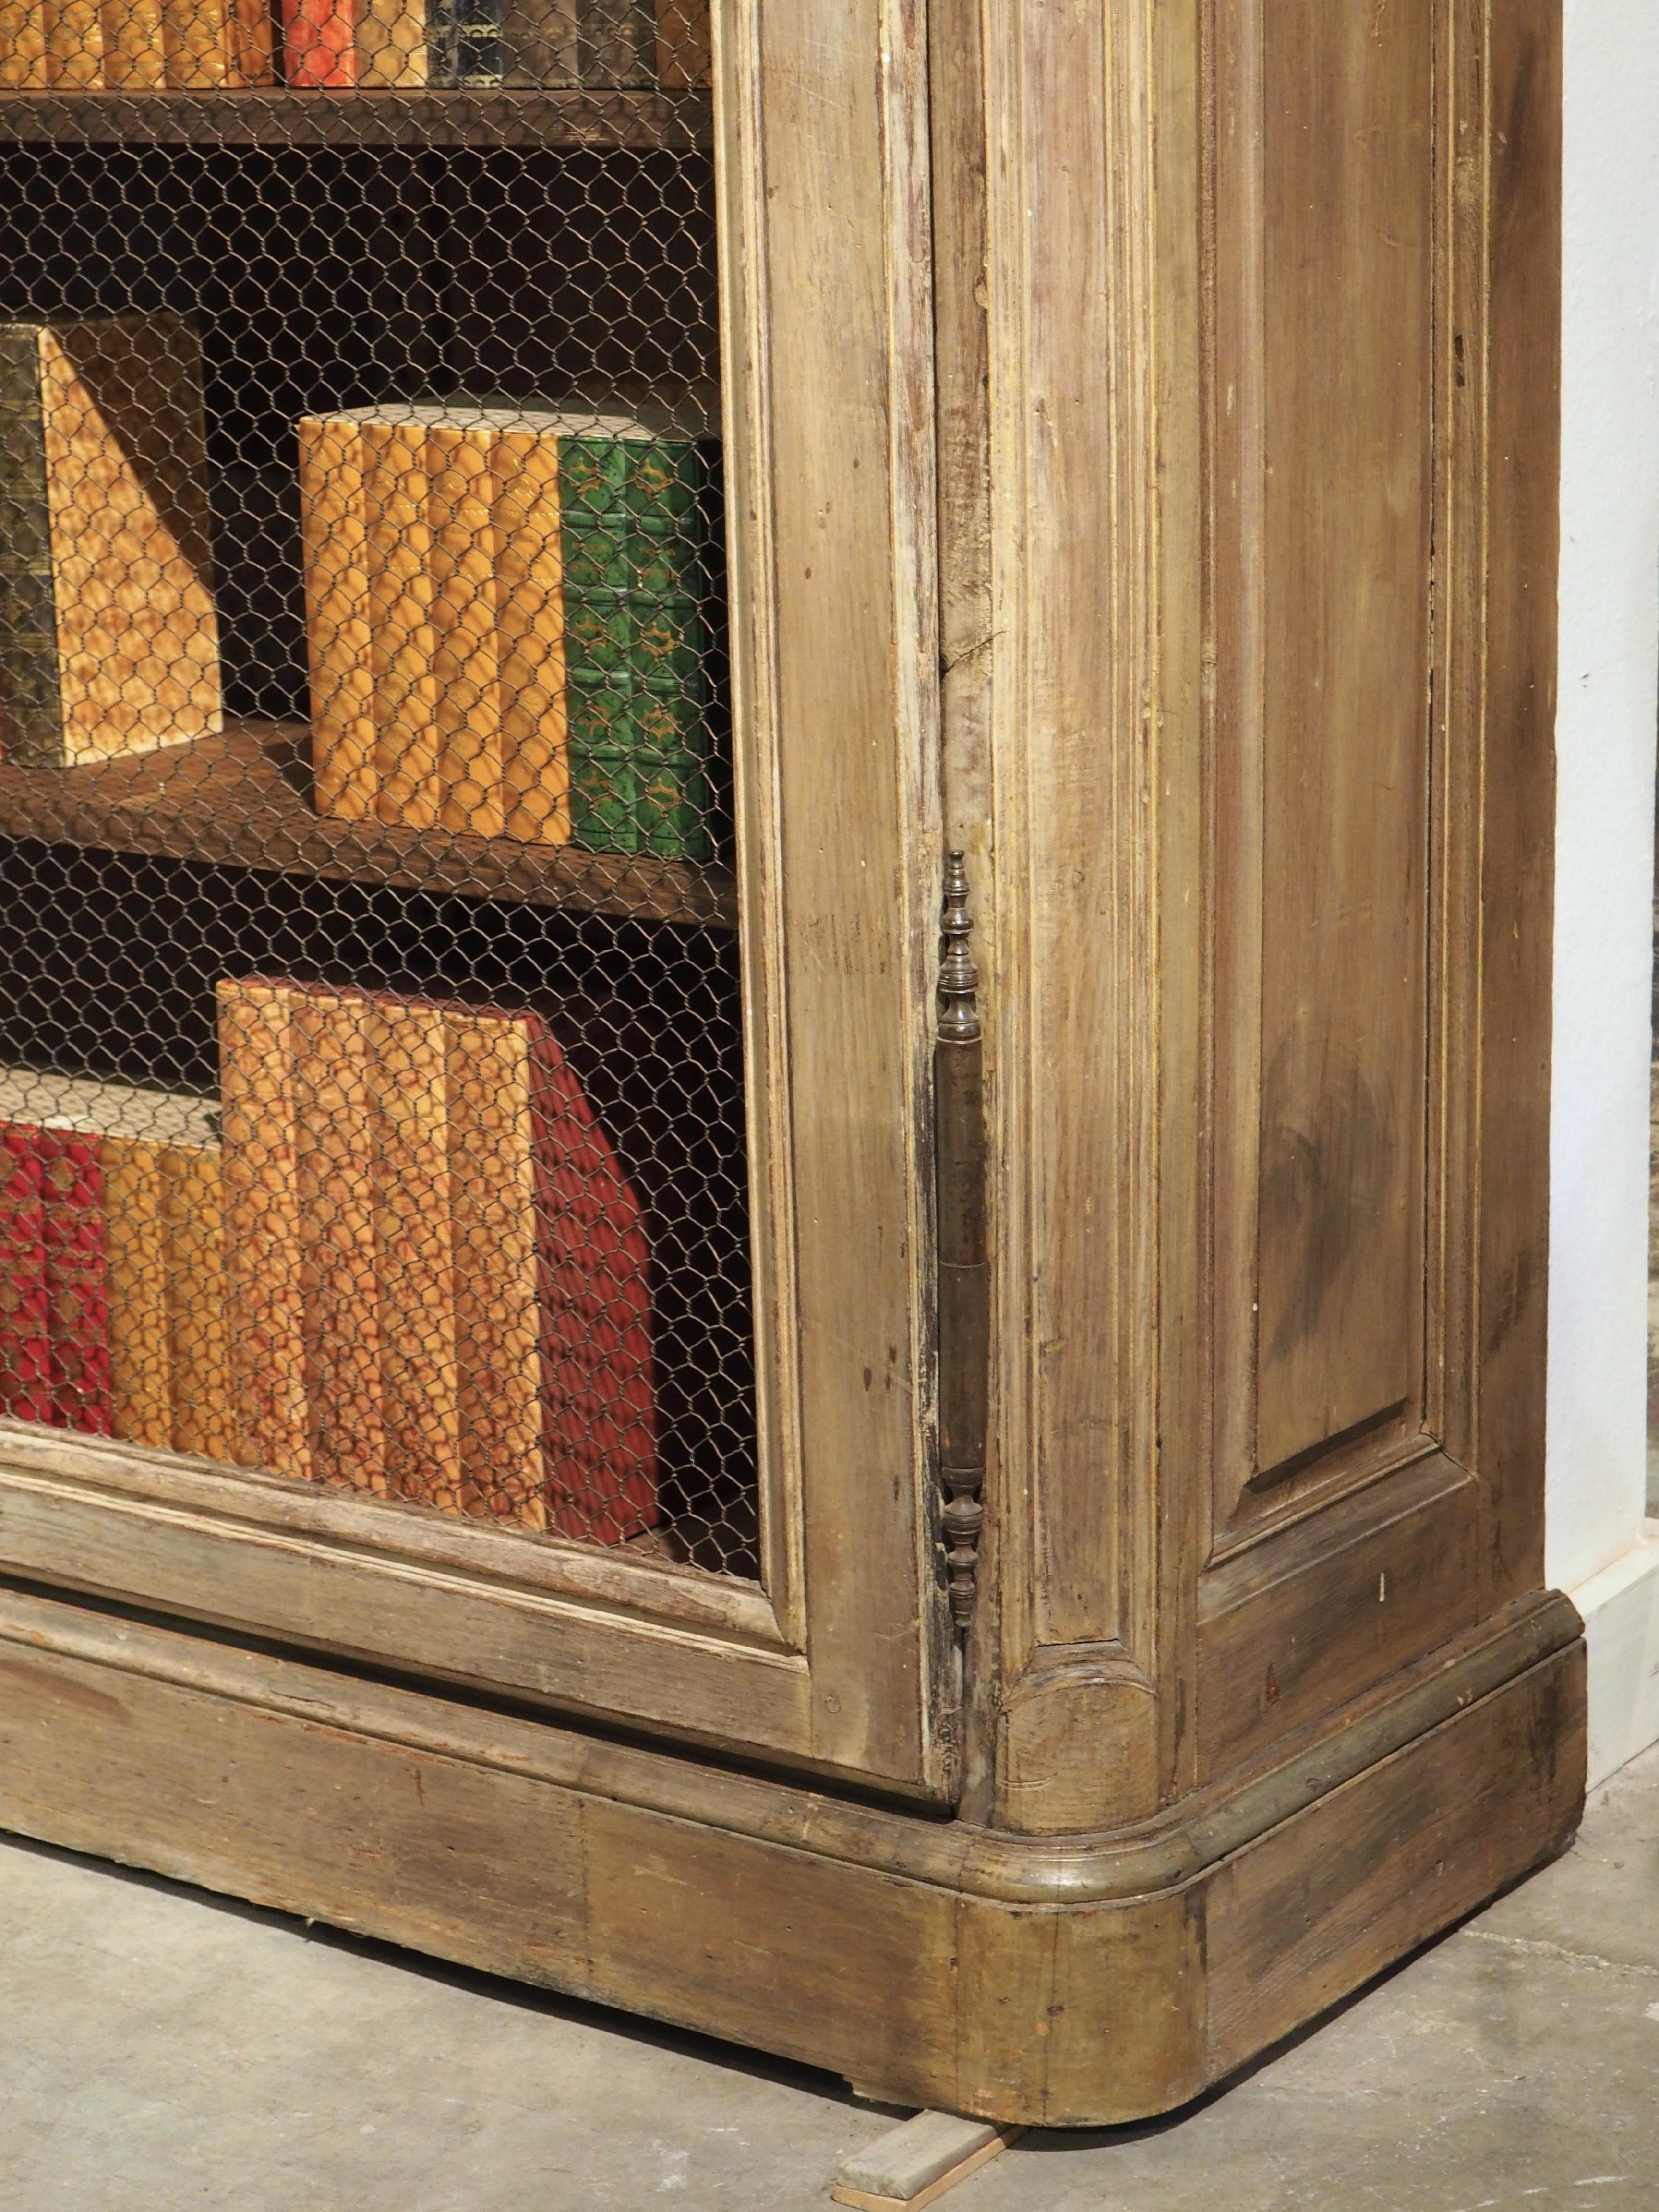 Early 19th Century French Bibliotheque Cabinet with Wire Mesh Door Panels 1